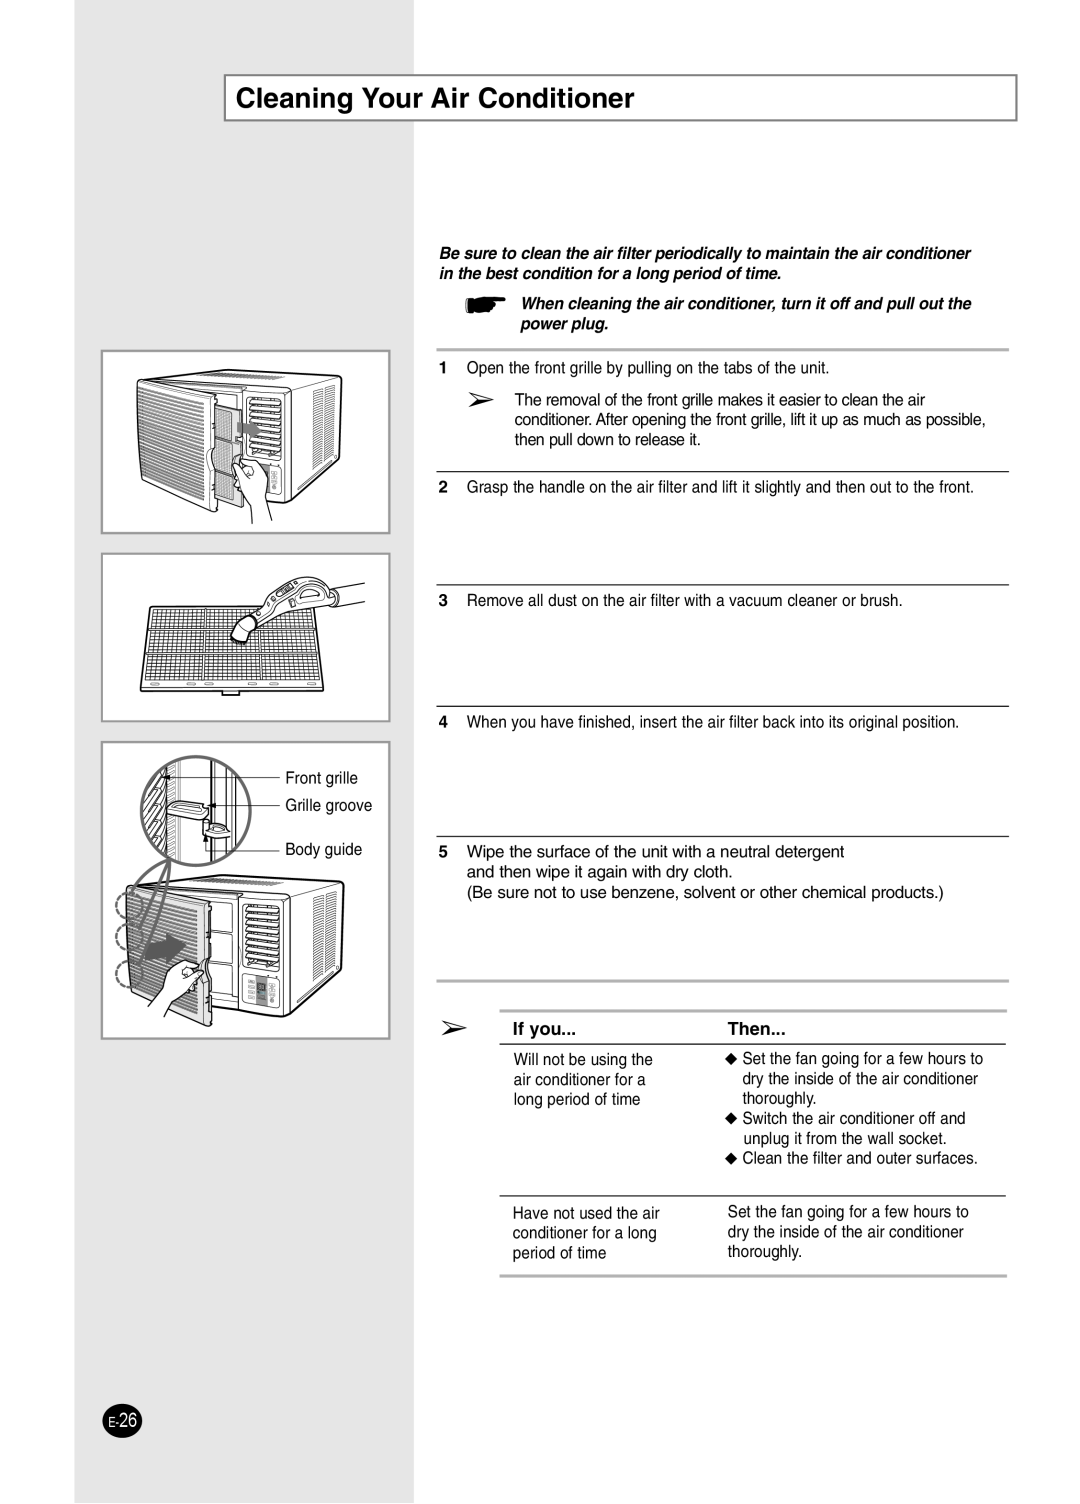 Samsung AW2492L manual Cleaning Your Air Conditioner, If you, Then 